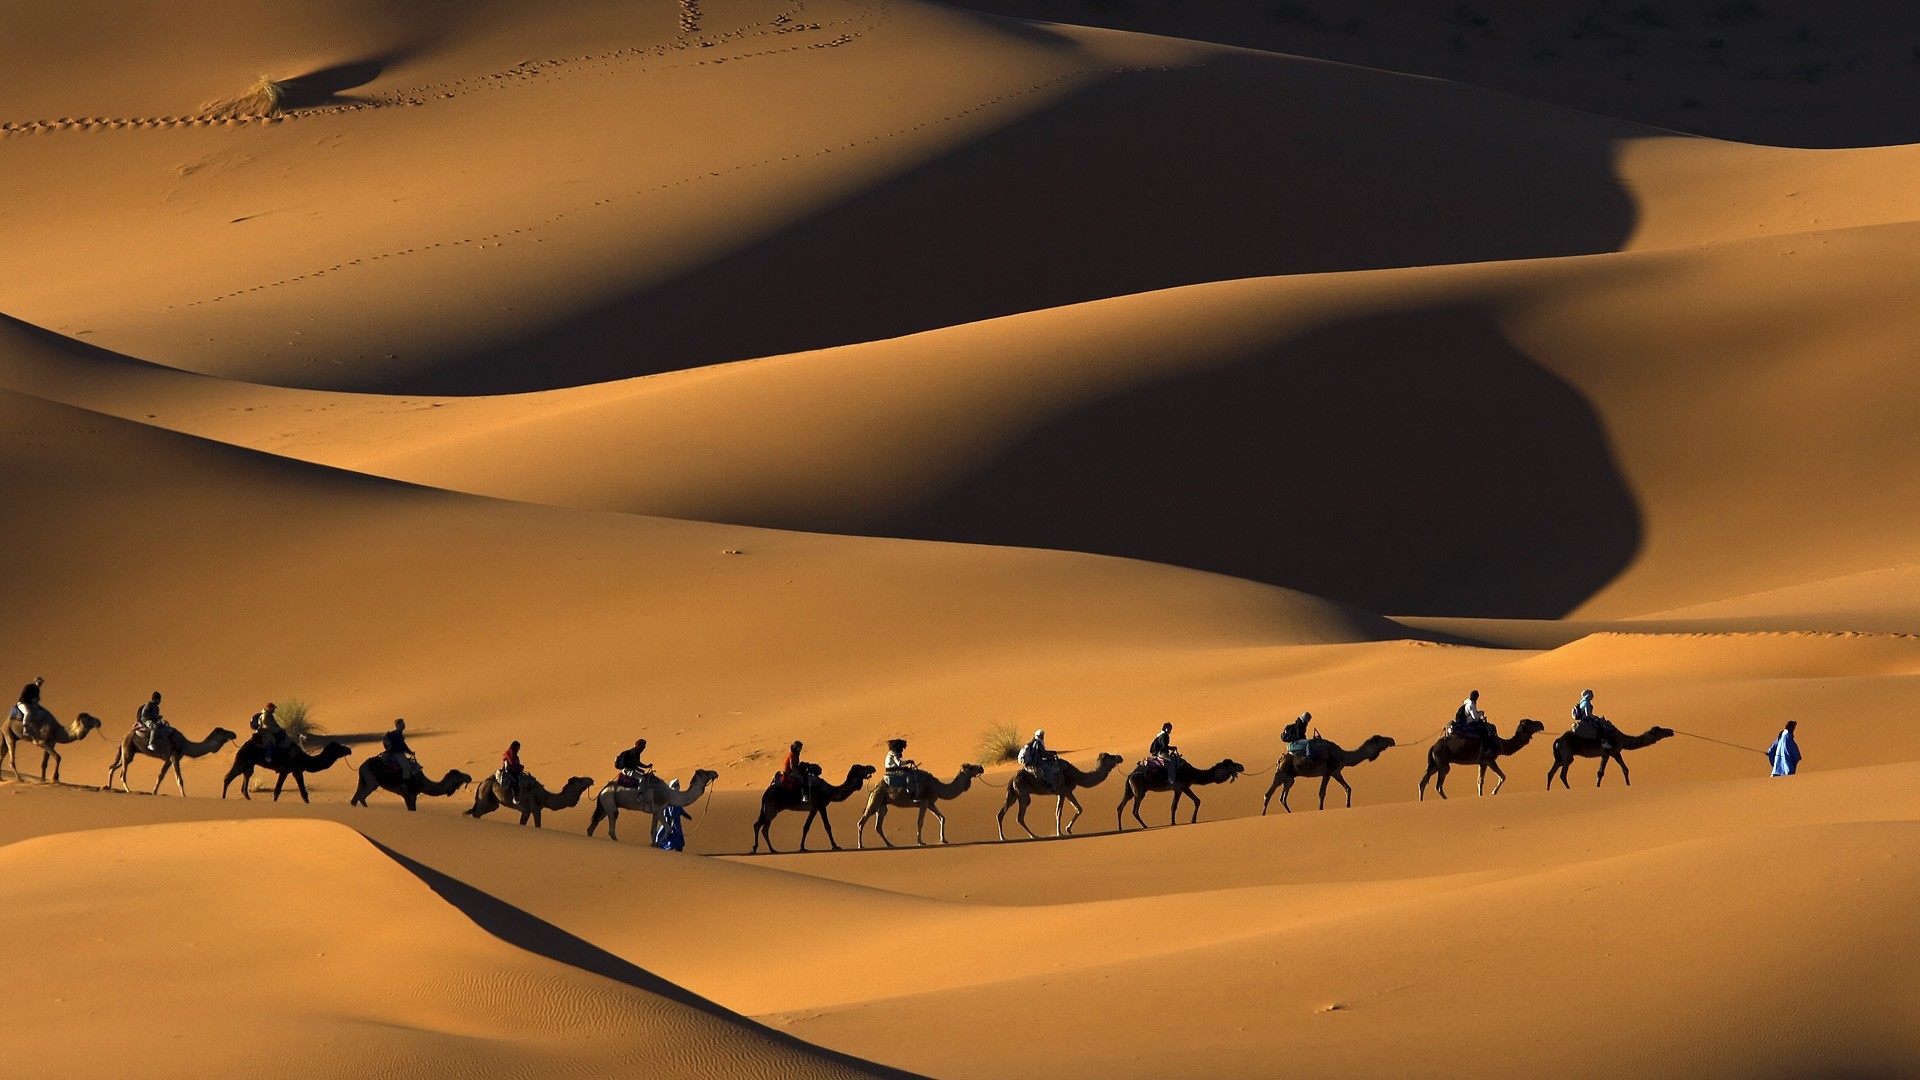 General 1920x1080 nature landscape camels sand desert shadow people animals dunes Africa foot prints mammals Morocco